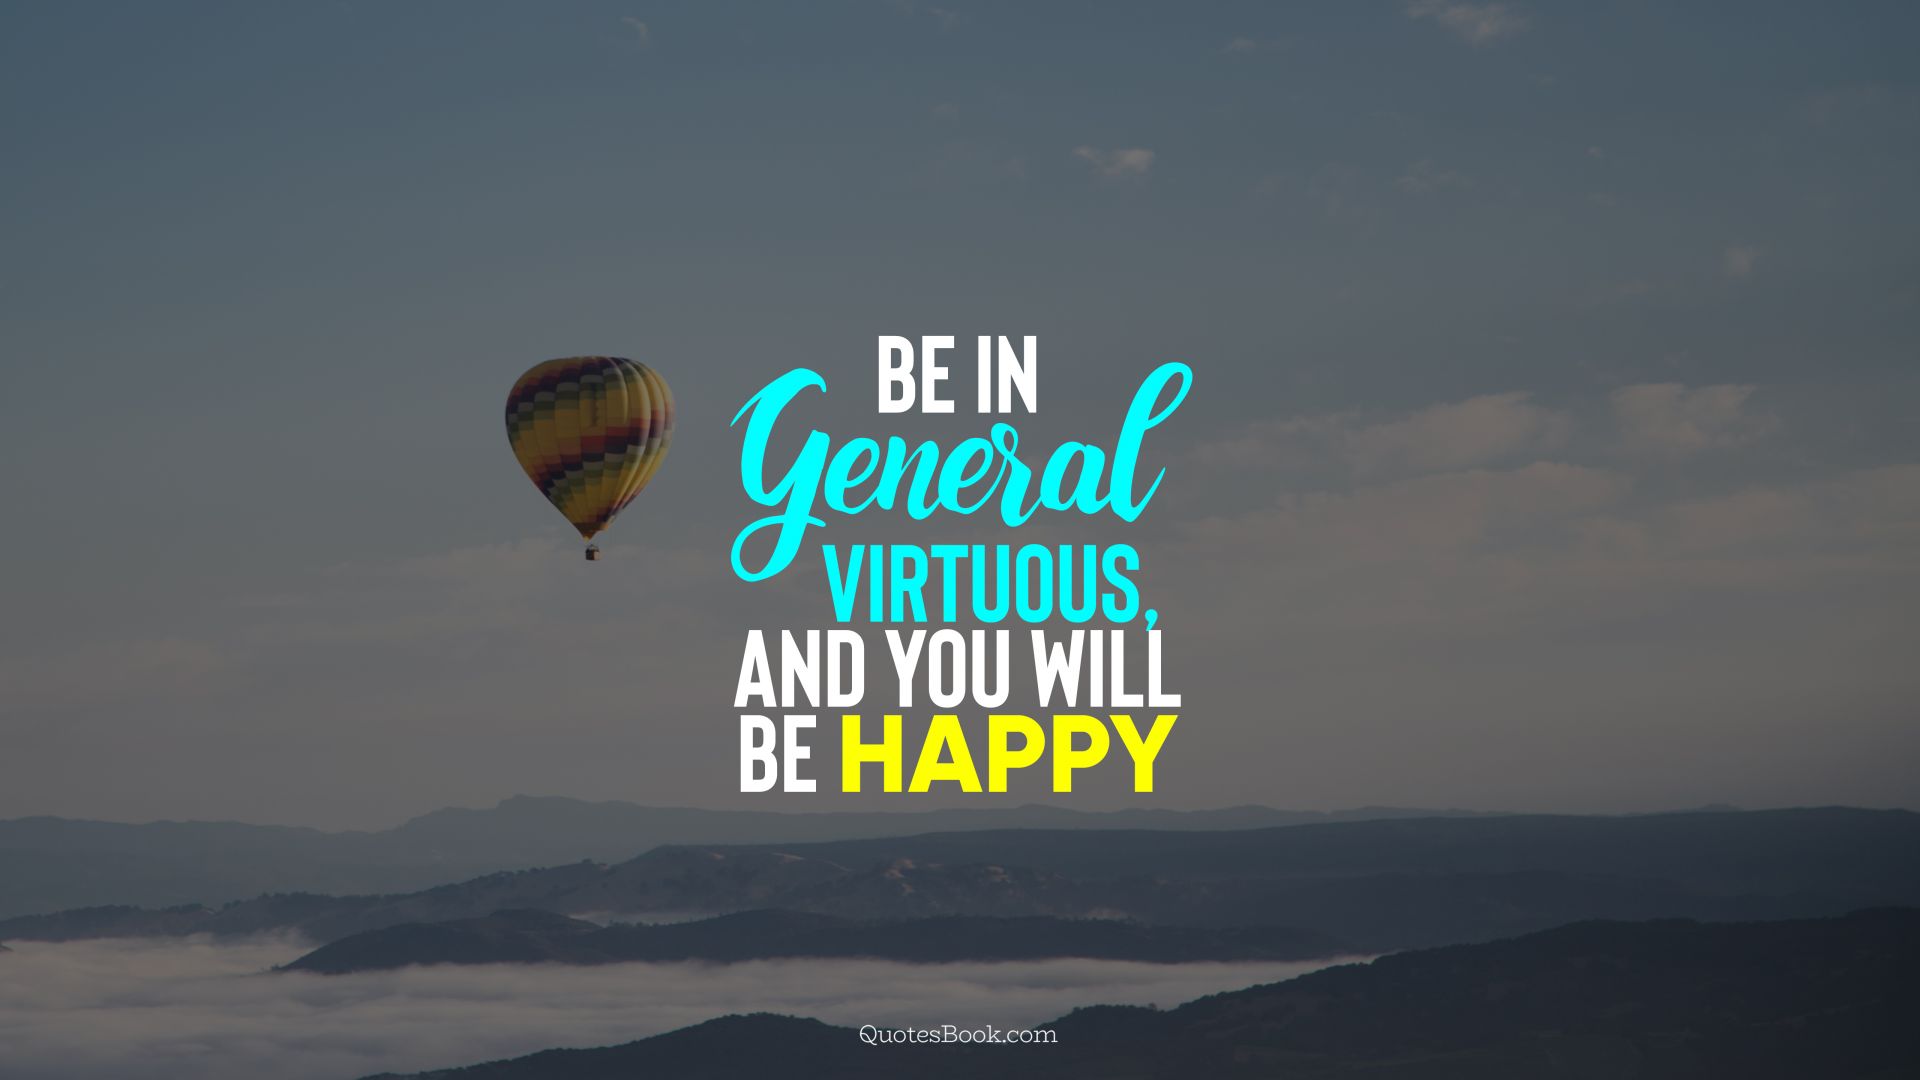 Be in general virtuous, and you will be happy